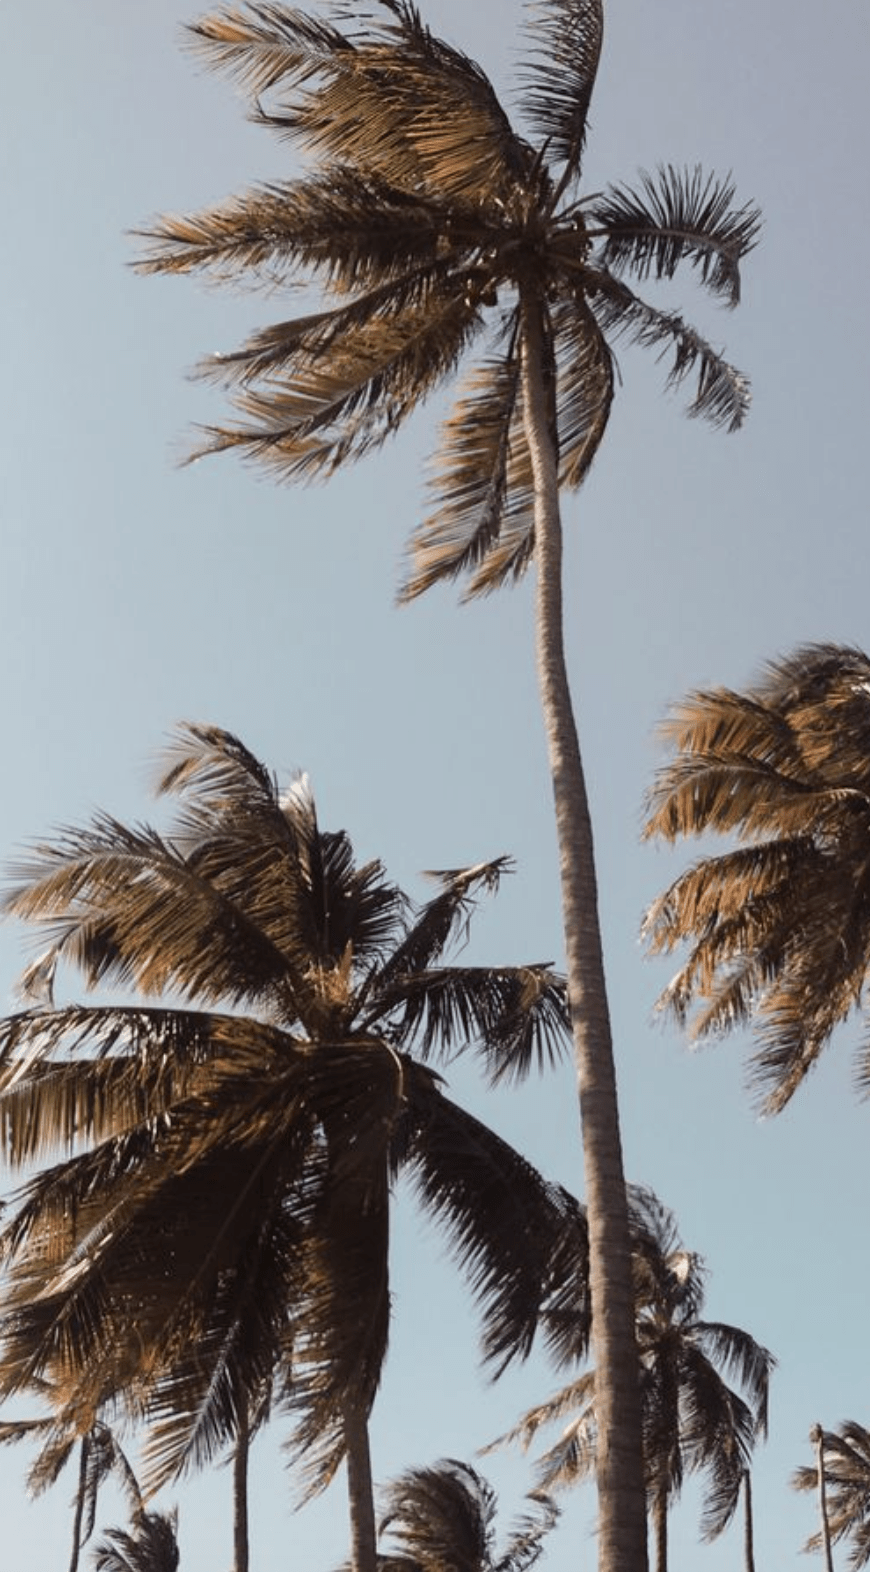 A photo of palm trees swaying in the wind. - Palm tree, coconut, Florida